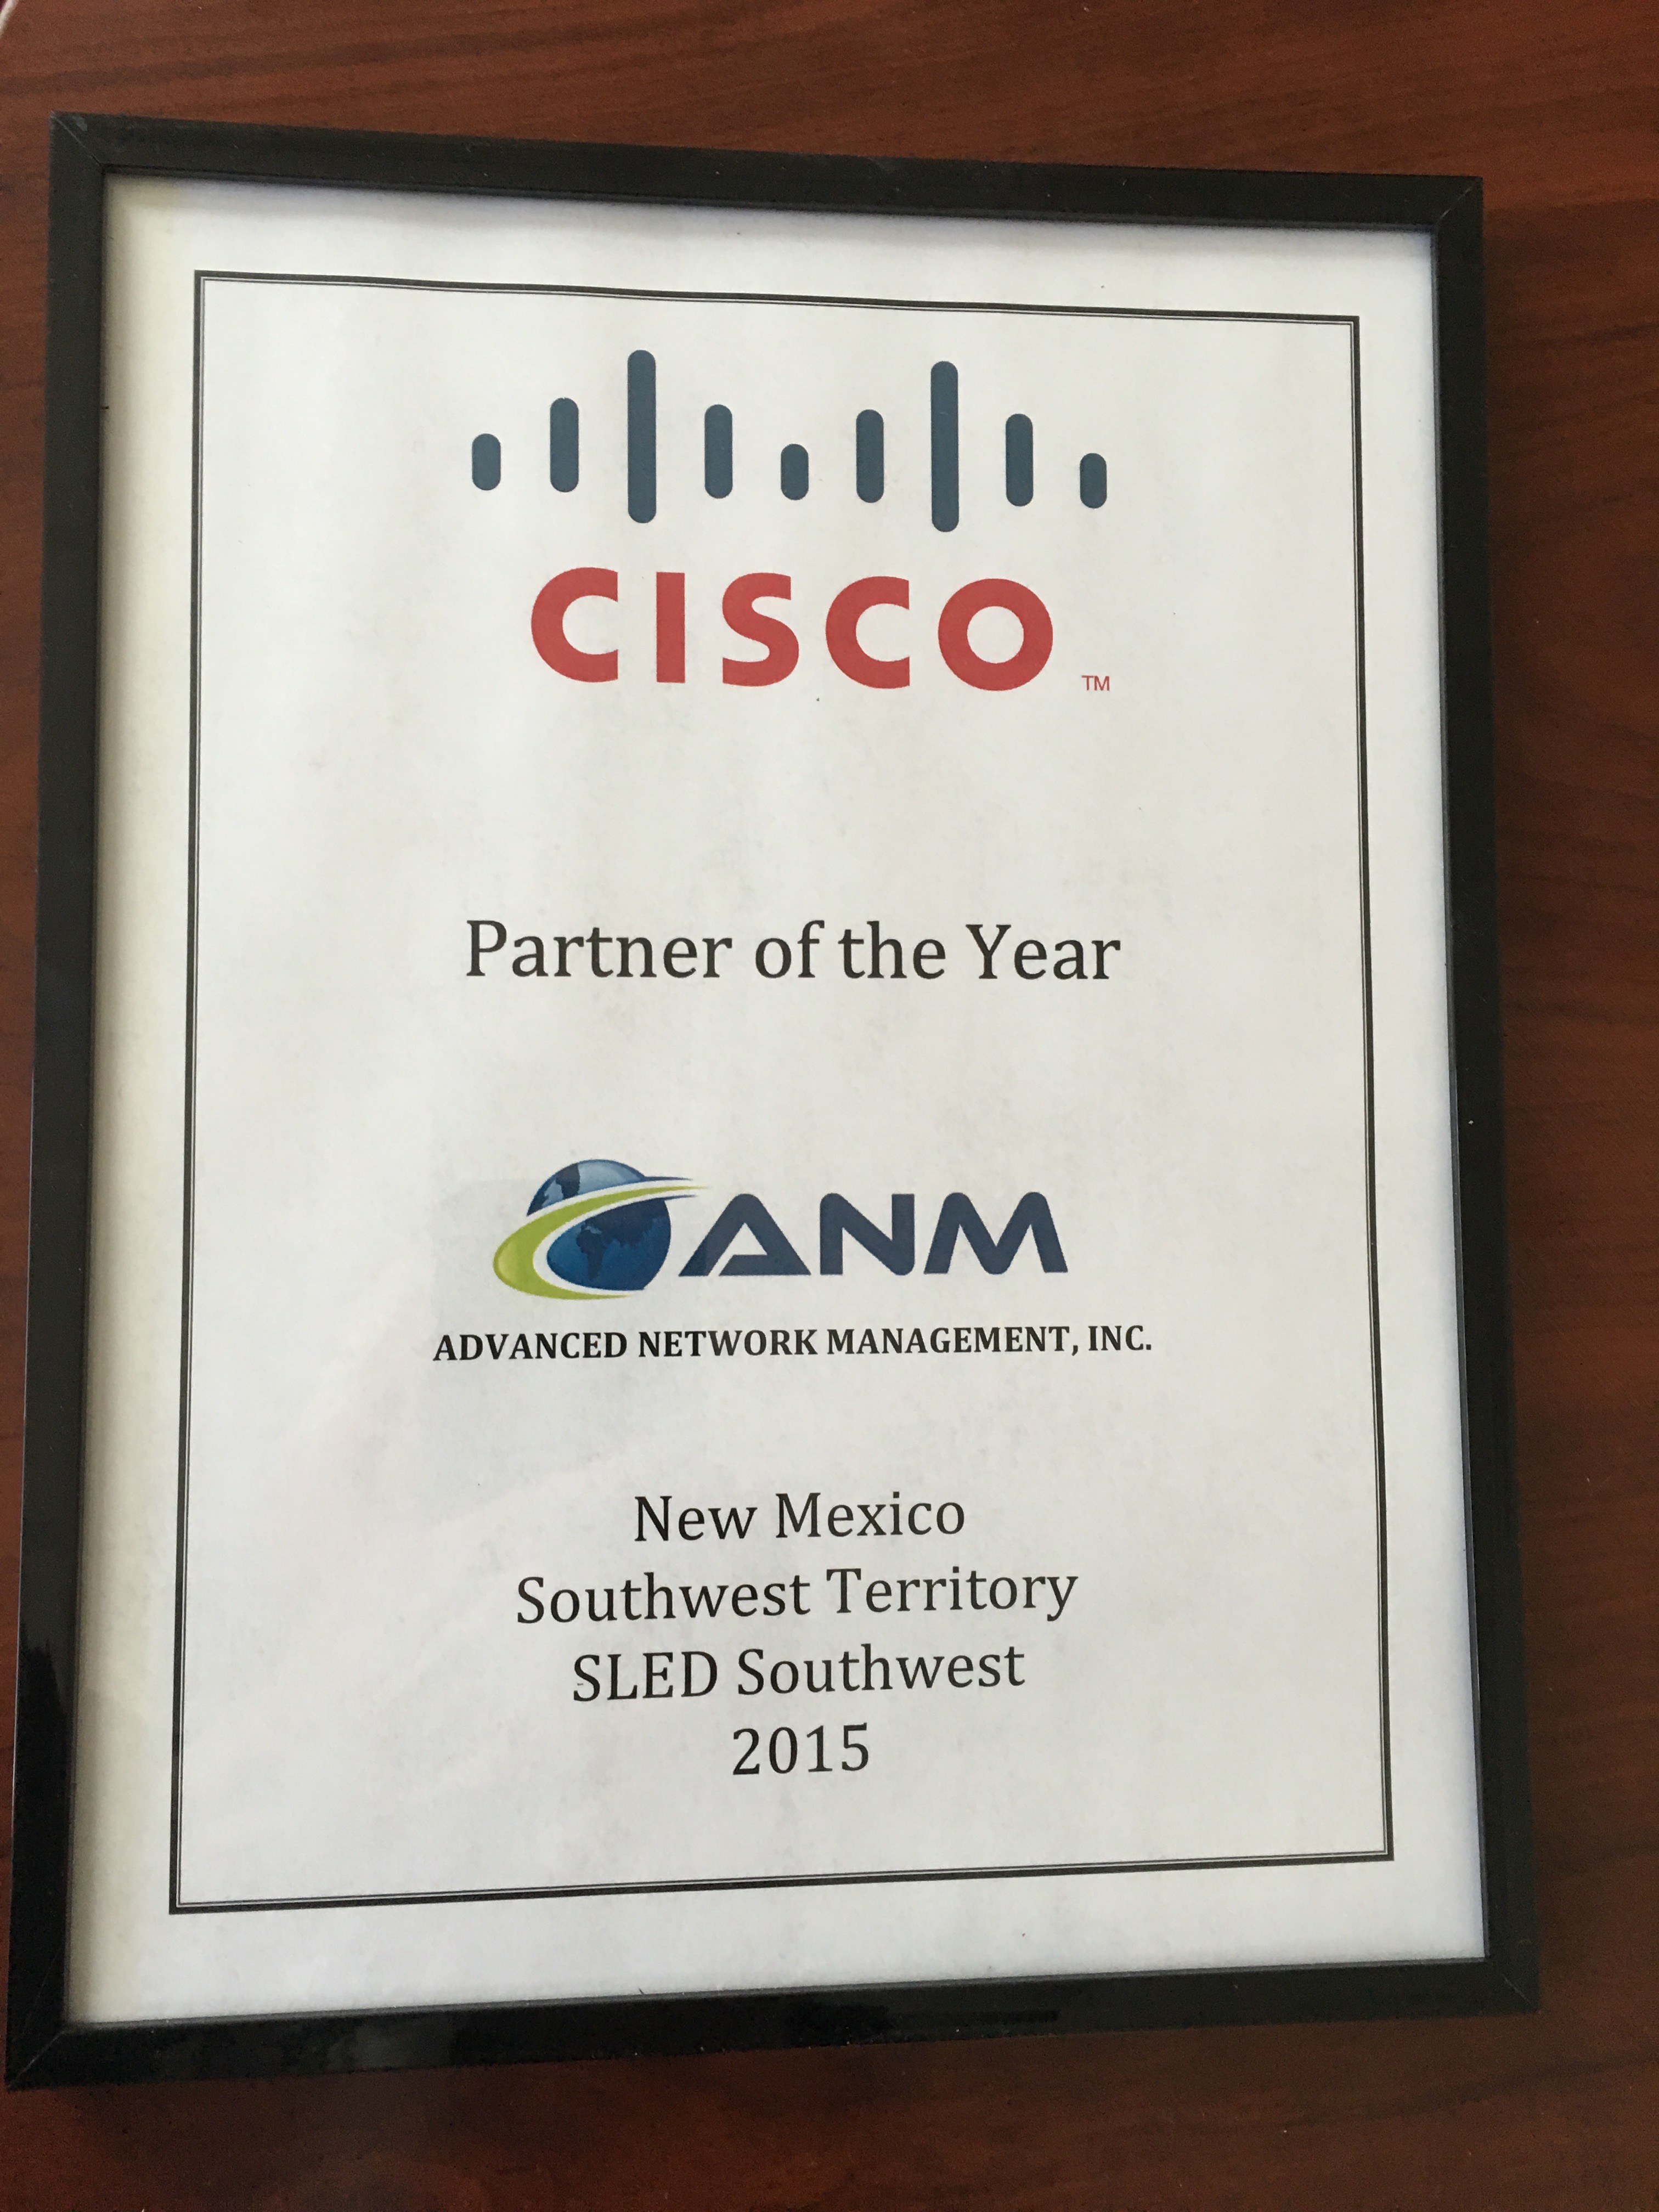 Partner of the Year!